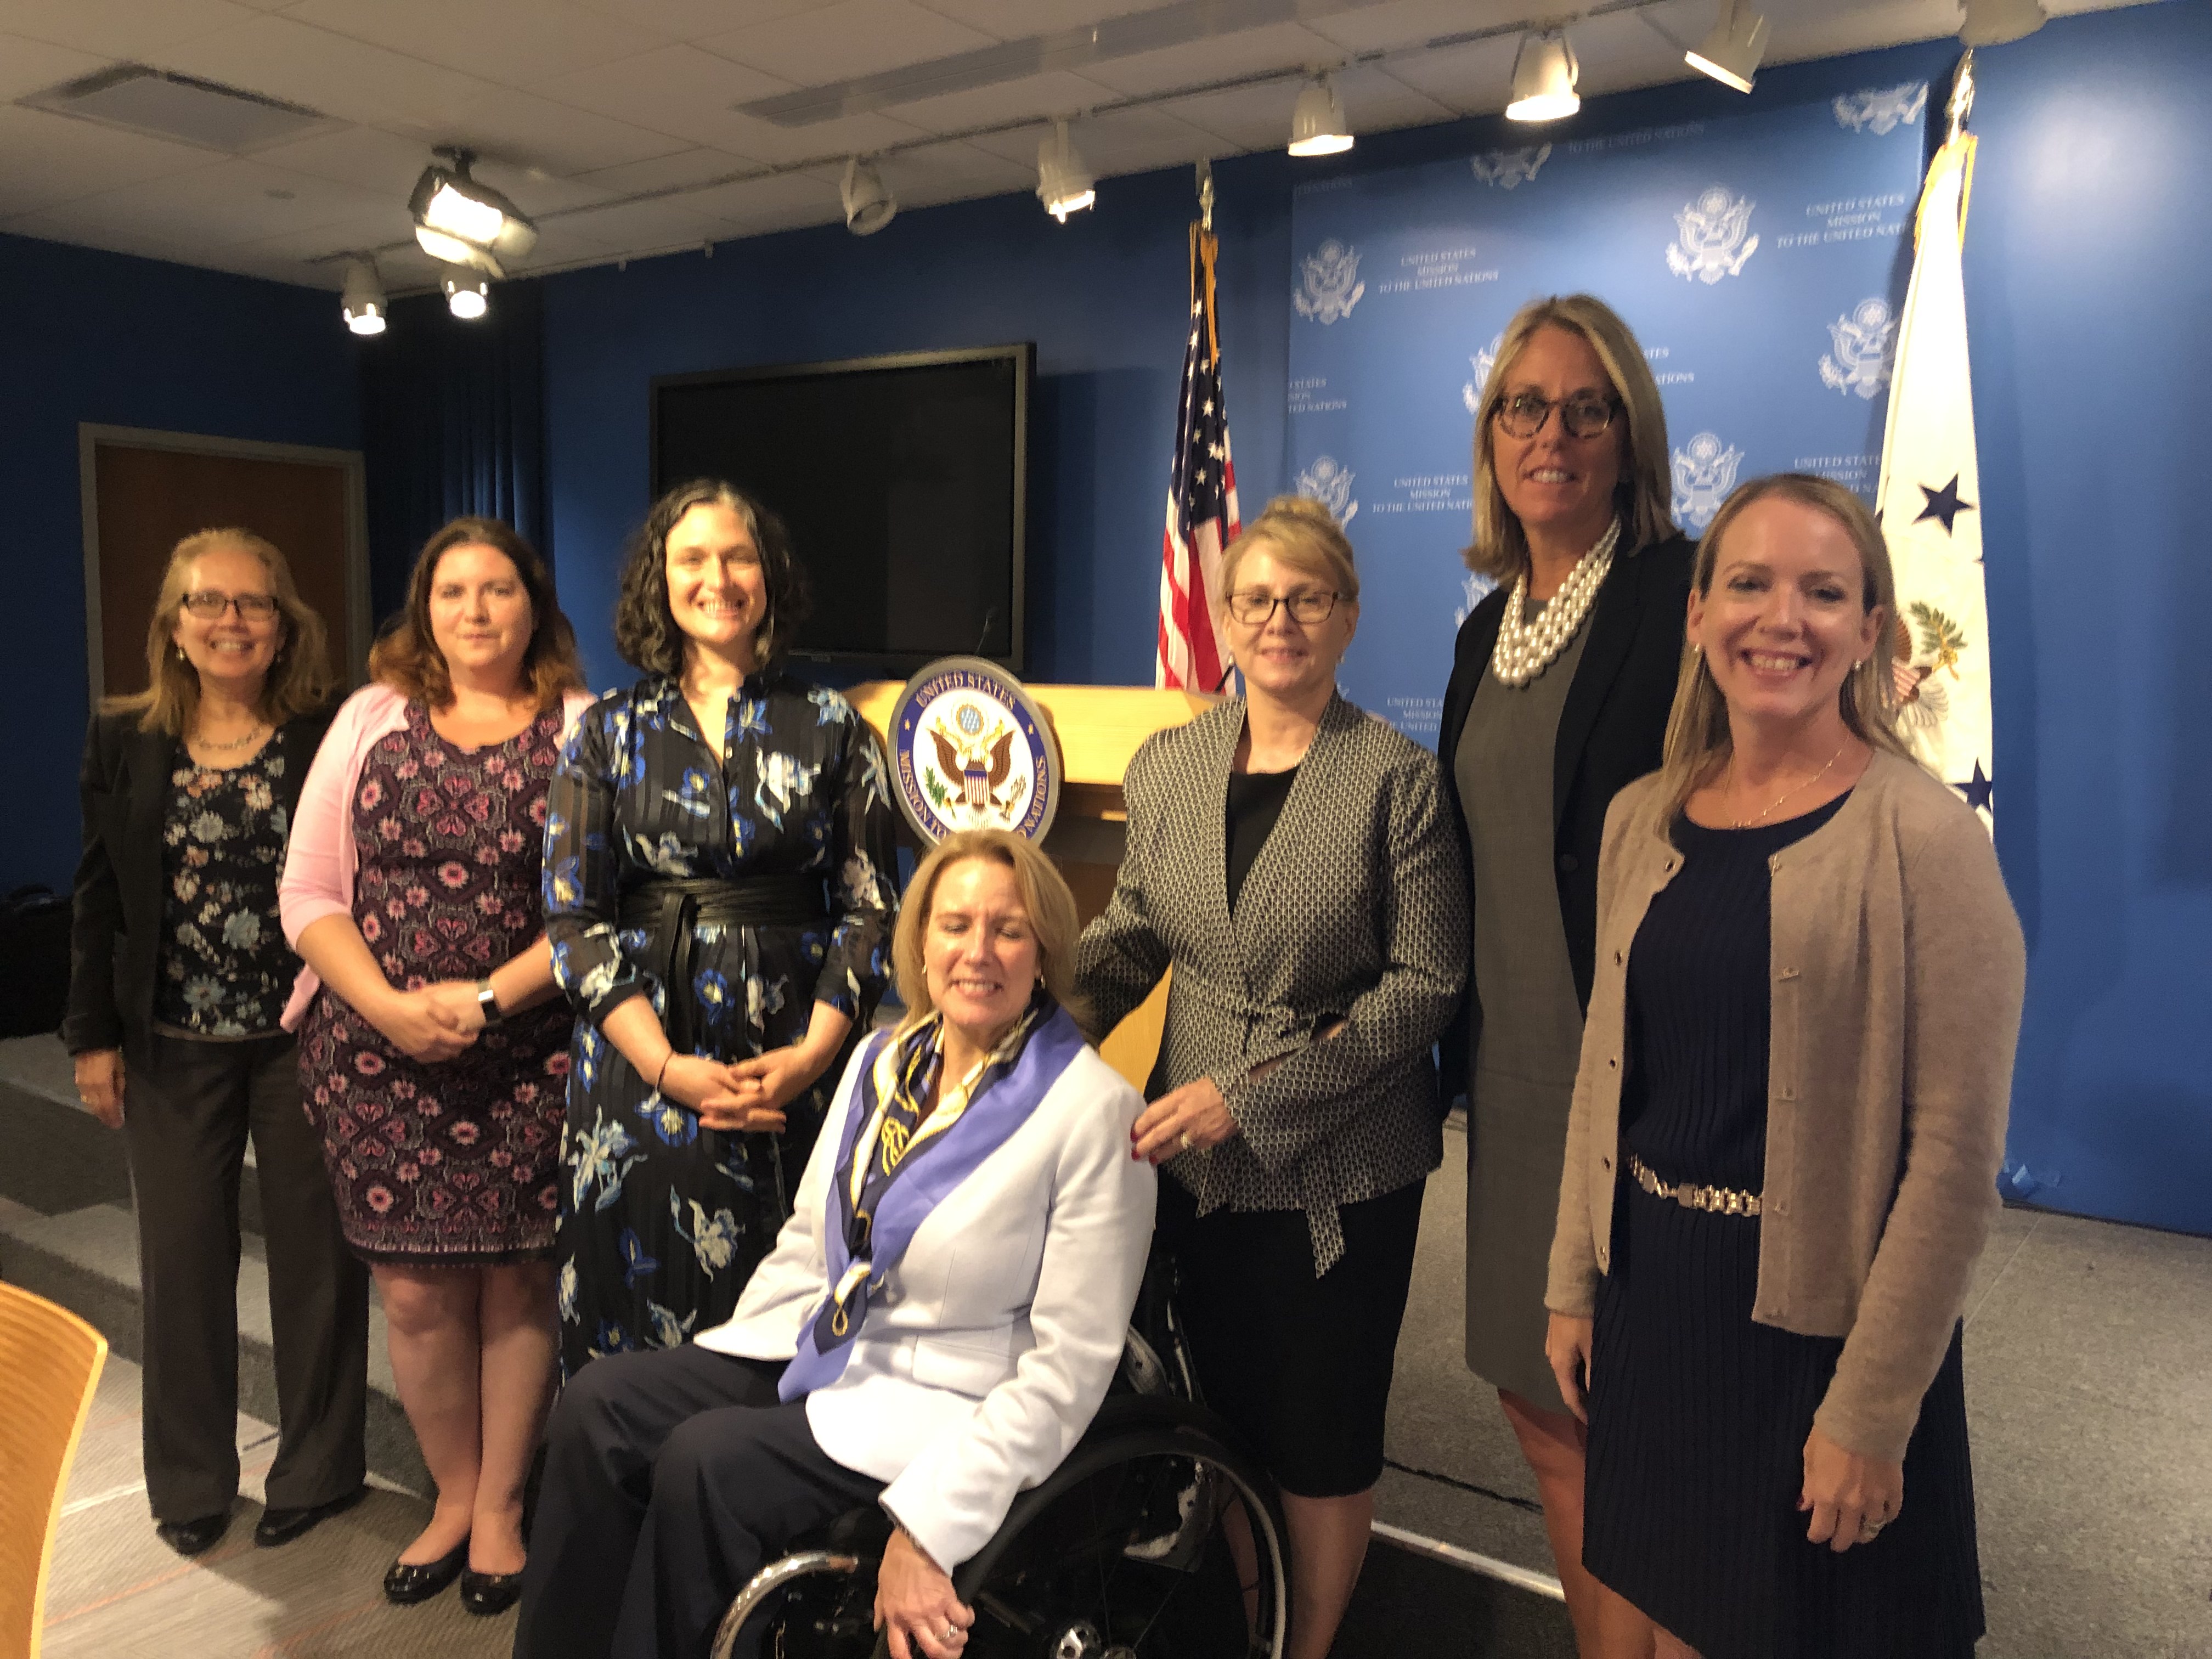 Group of women accessible leaders with apparent and non-apparent disabilities wearing business professional attire and standing in front of a podium